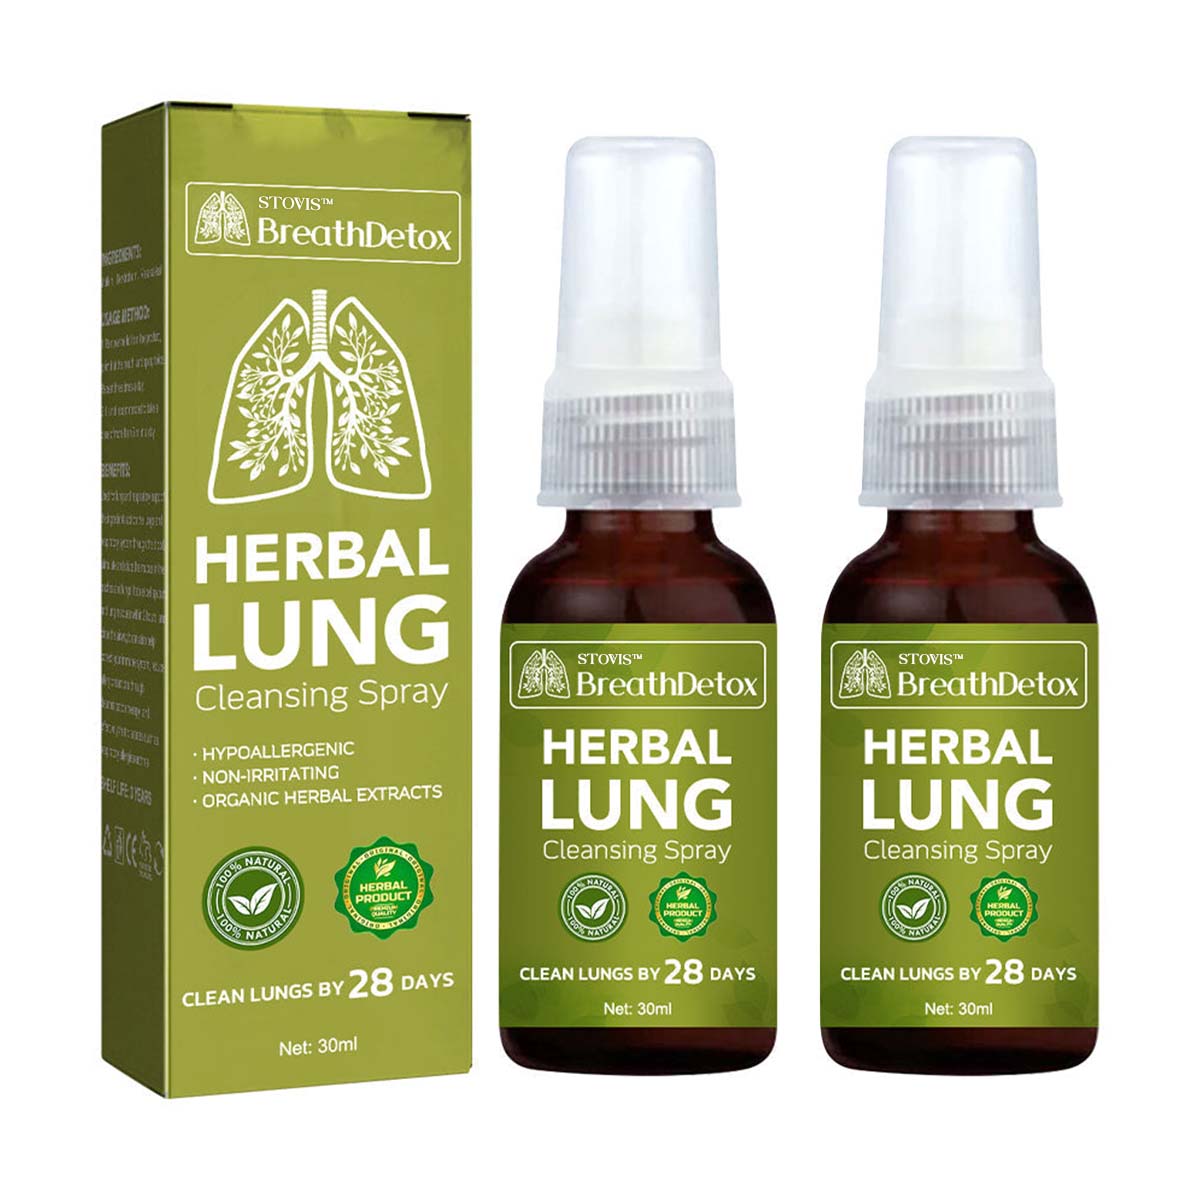 BreathDetox Herbal Lung Cleansing Spray